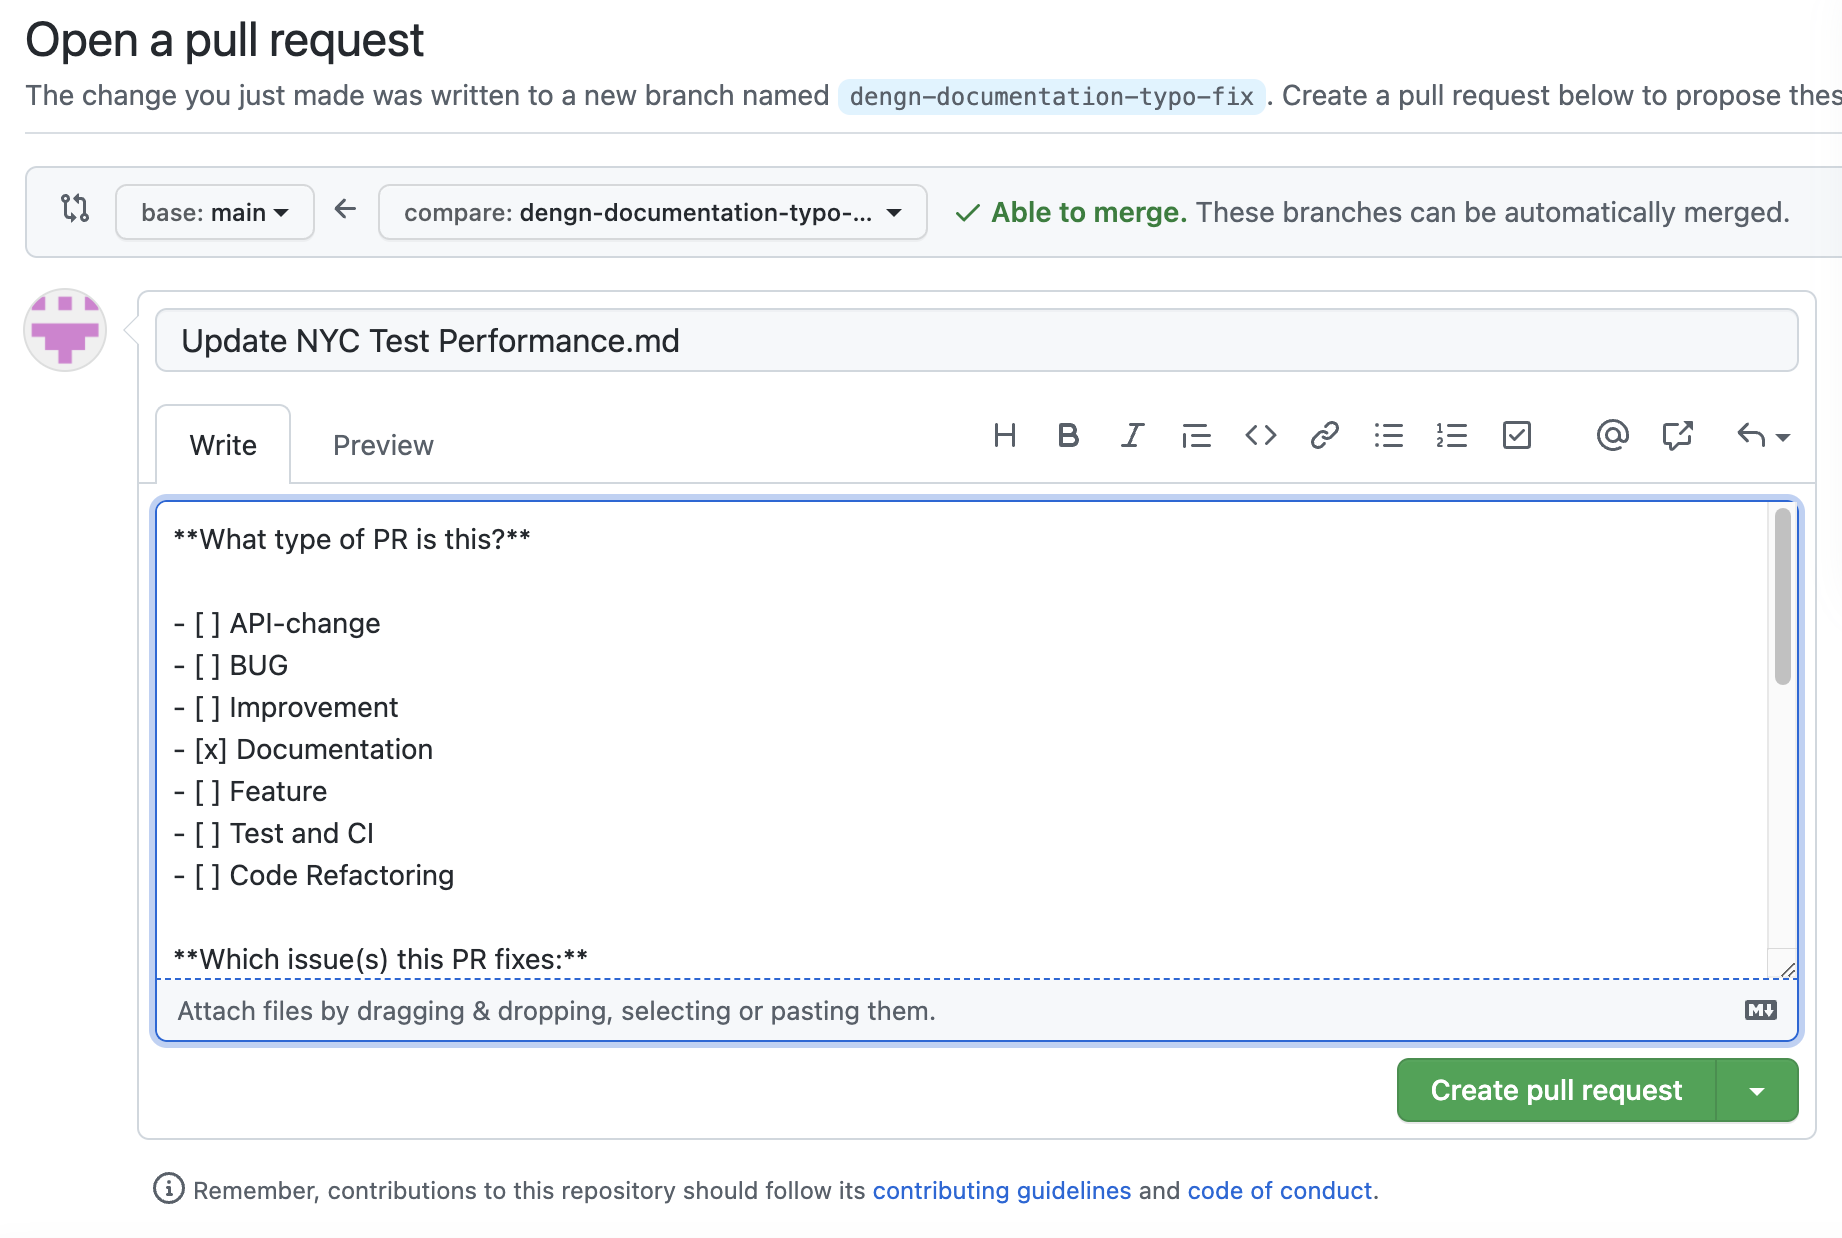 Pull Request Template